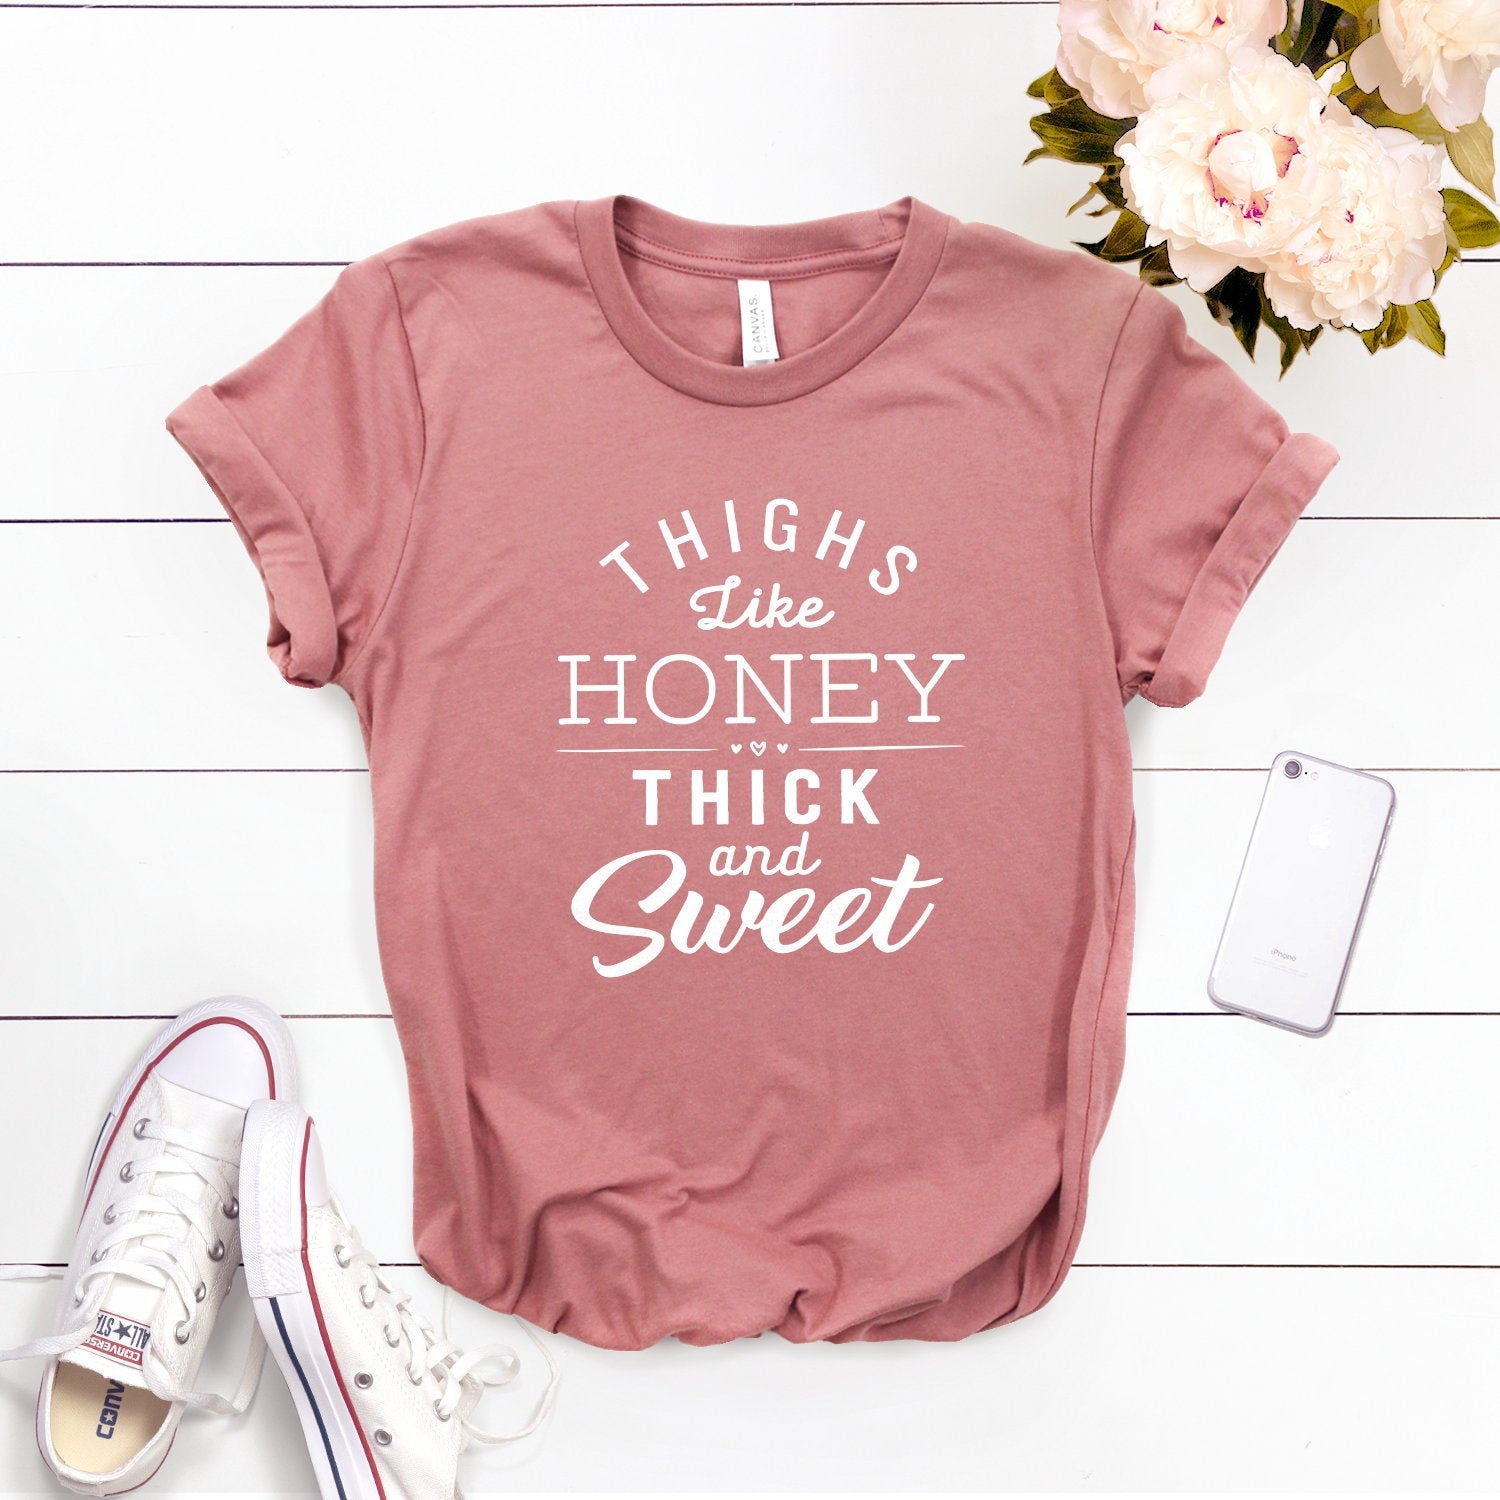 Thighs Like Honey, Thick and Sweet Shirt Thick Thighs Thin Patience Shirt  Sassy Shirt Thick Thighs Save Lives Softstyle Unisex Shirt 